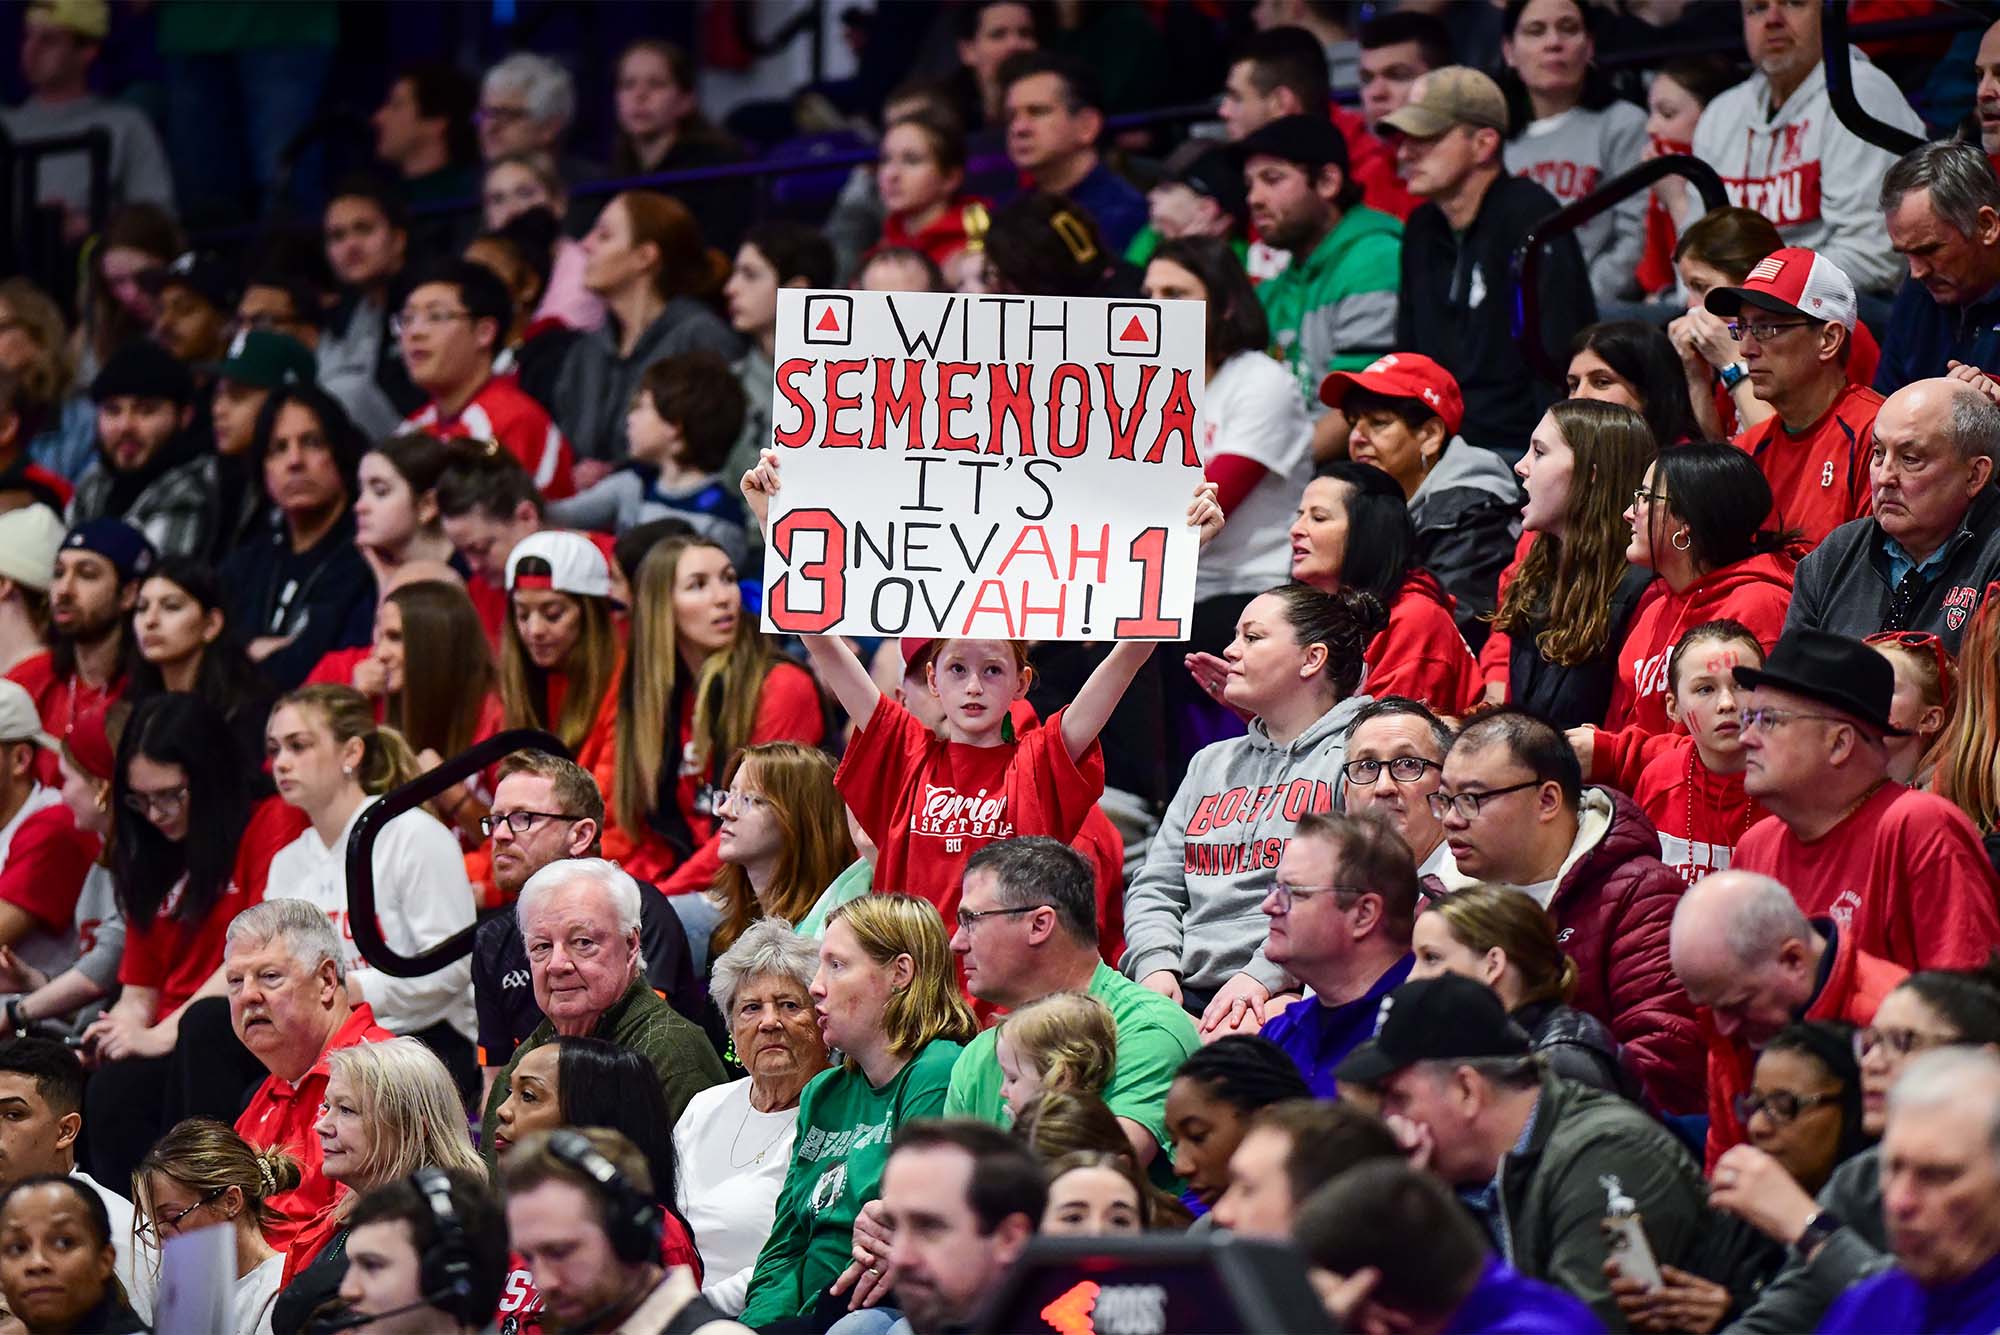 Photo: A young fan holding a sign in a sea of fans at a women's basketball game. The sign reads "With Semenova, it's 'neva ovah' [never over]"